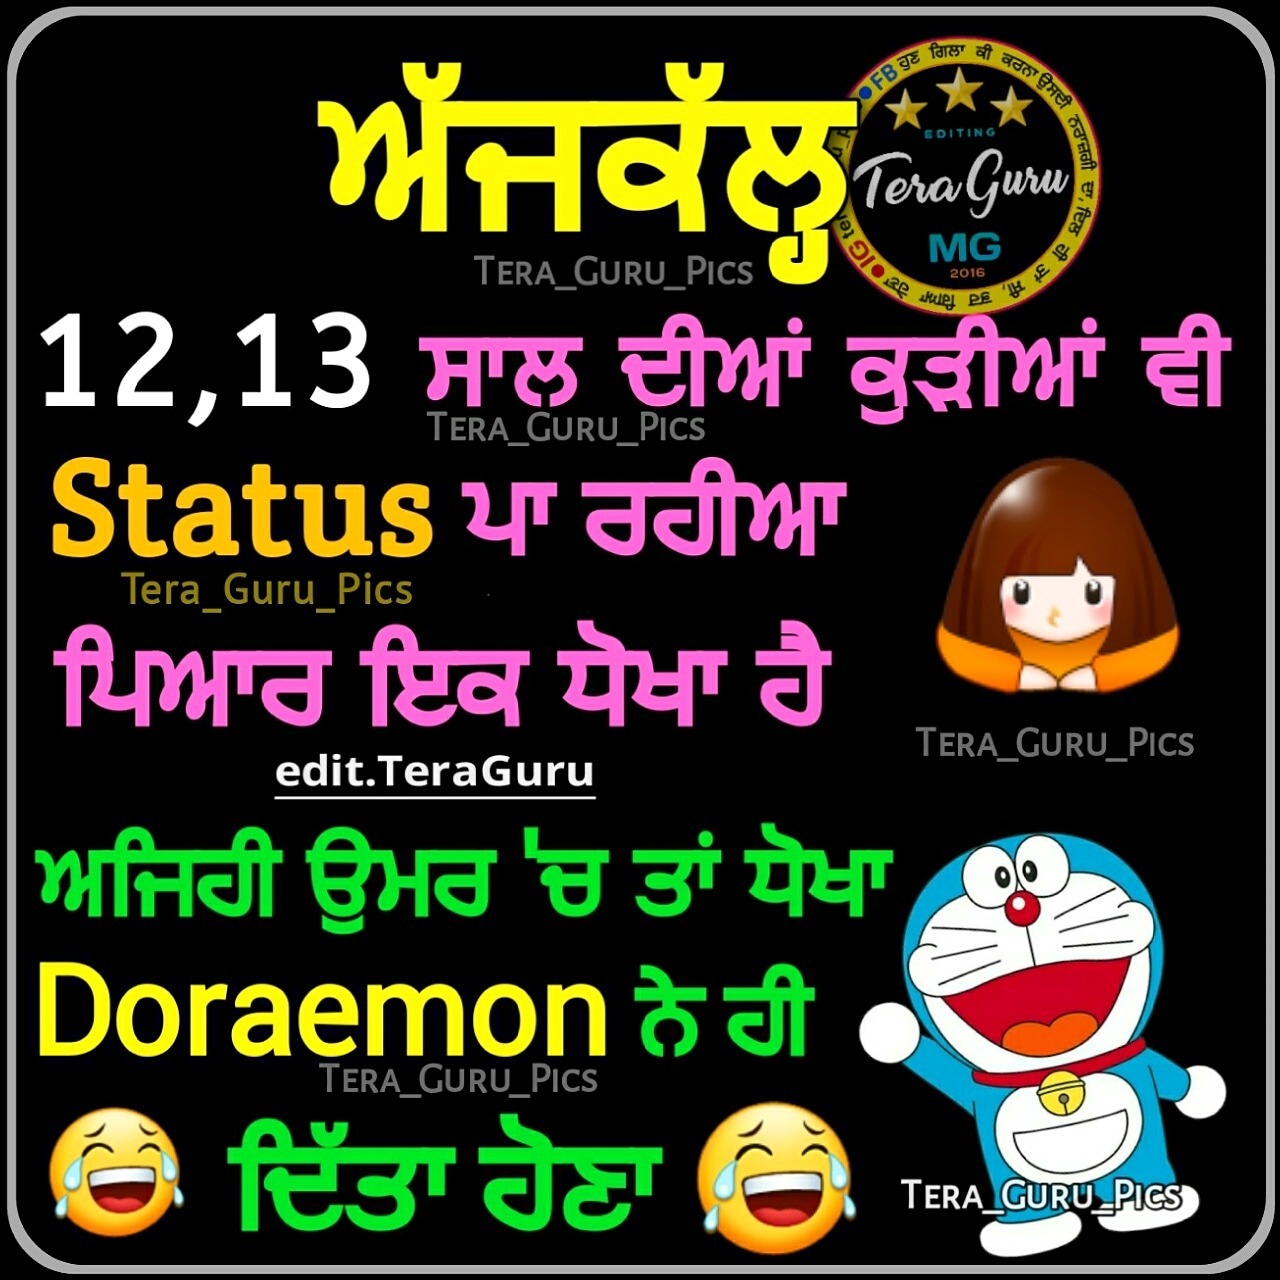 2390+ Punjabi Funny Images, Pictures, Photos - Page 16